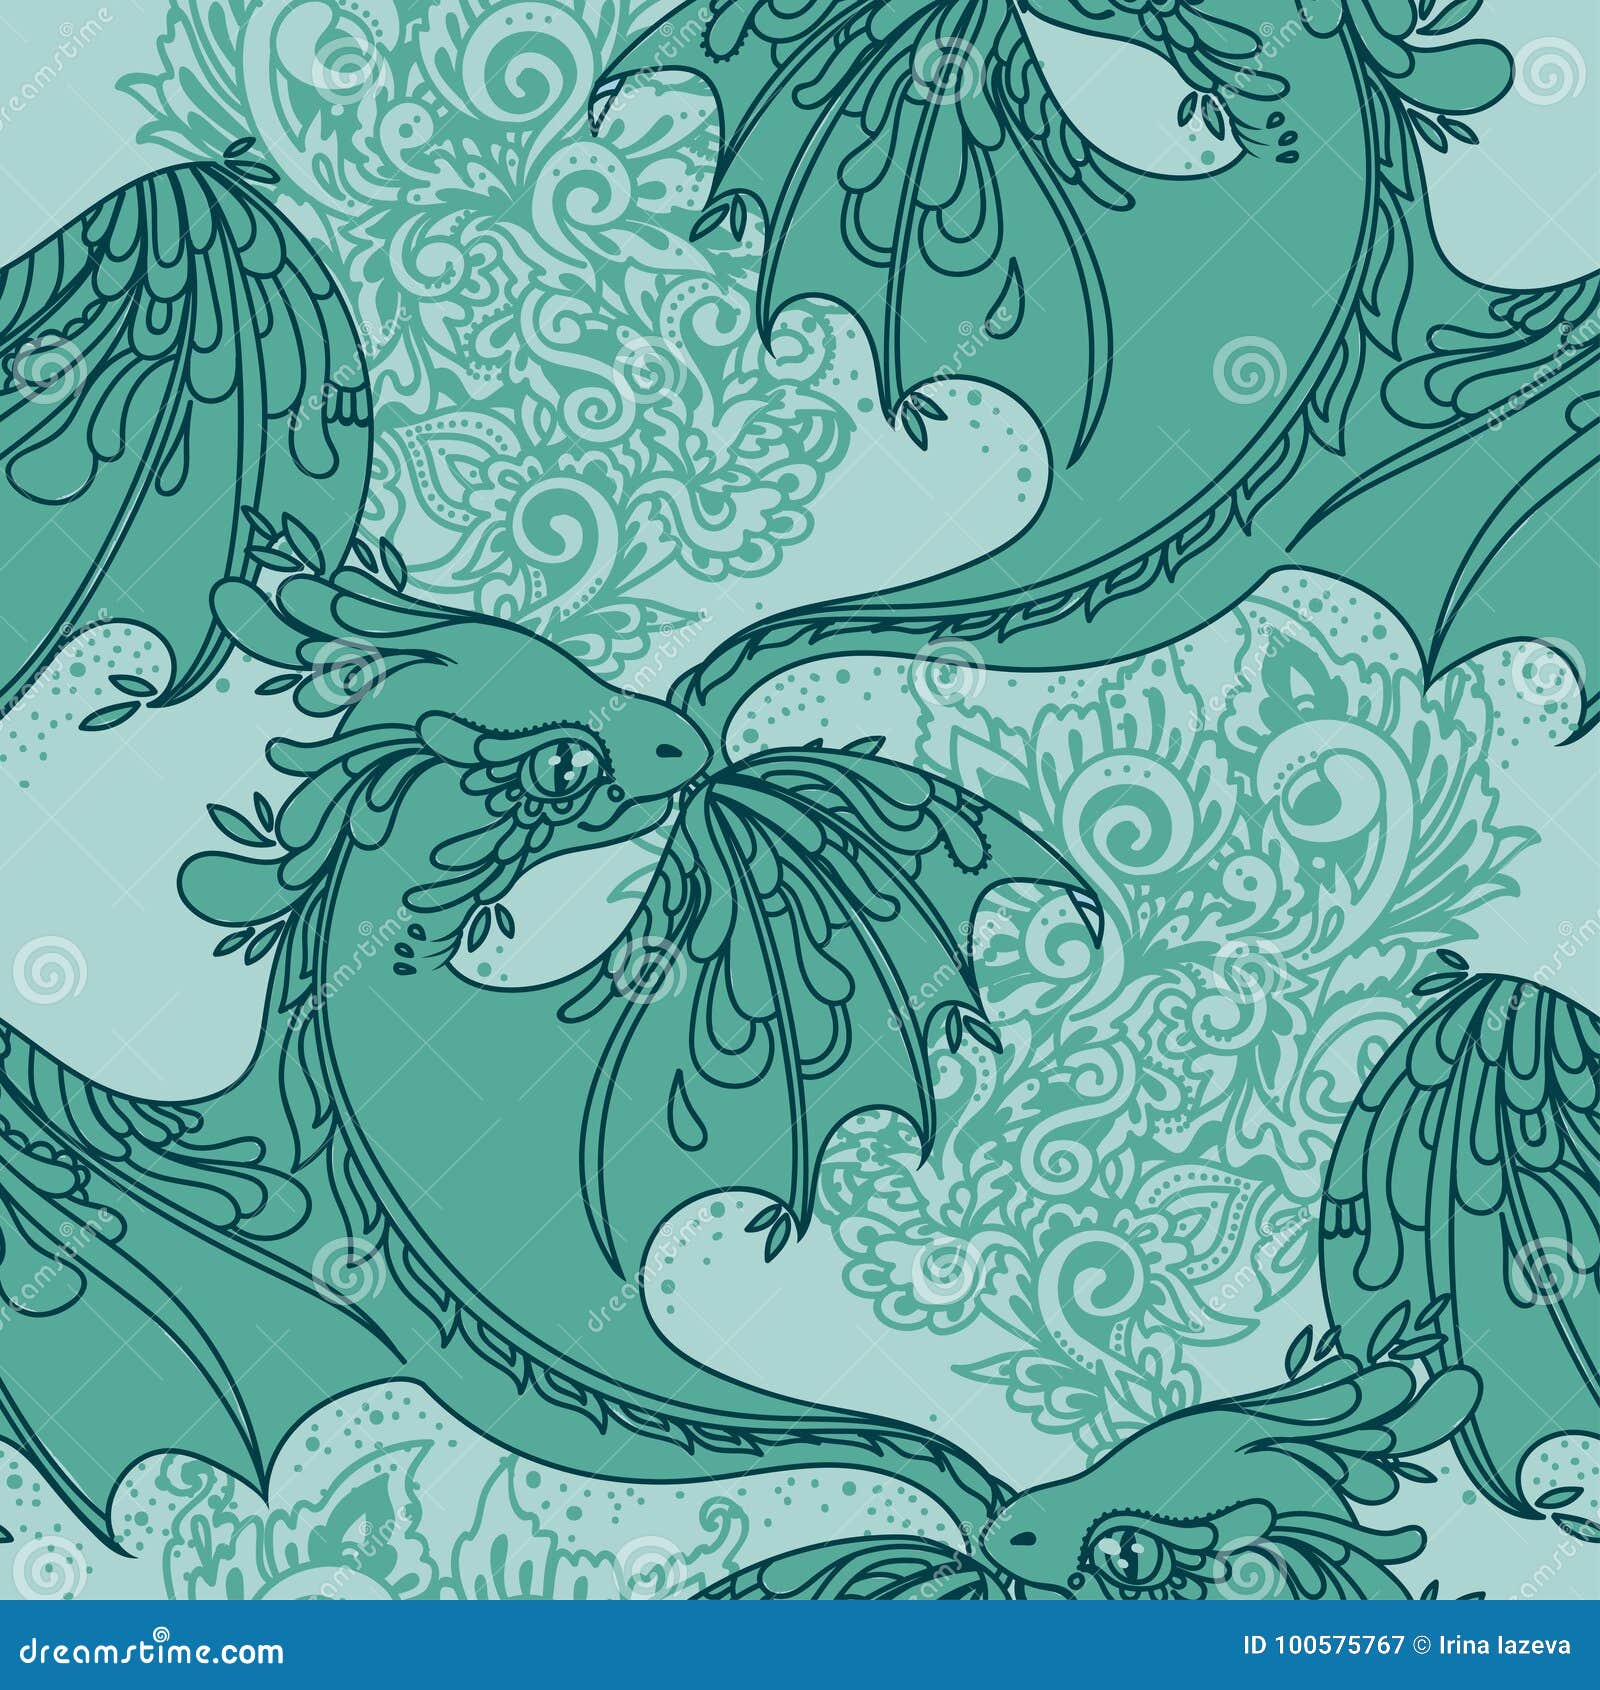 Seamless pattern with cute fantasy dragons, vector illustration